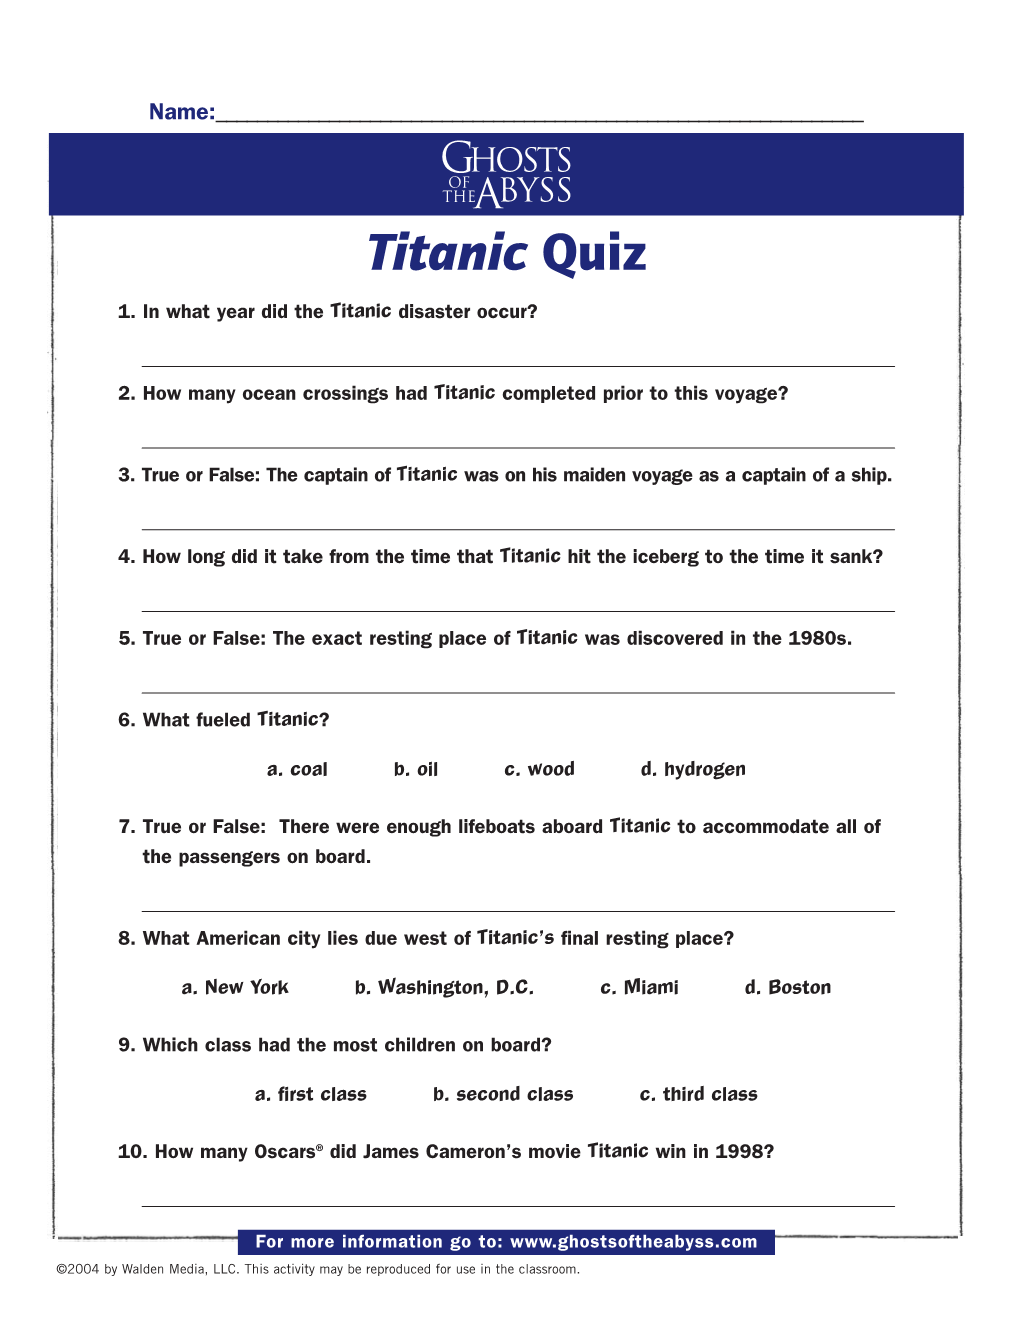 Ghosts of the Abyss: Titanic Quiz